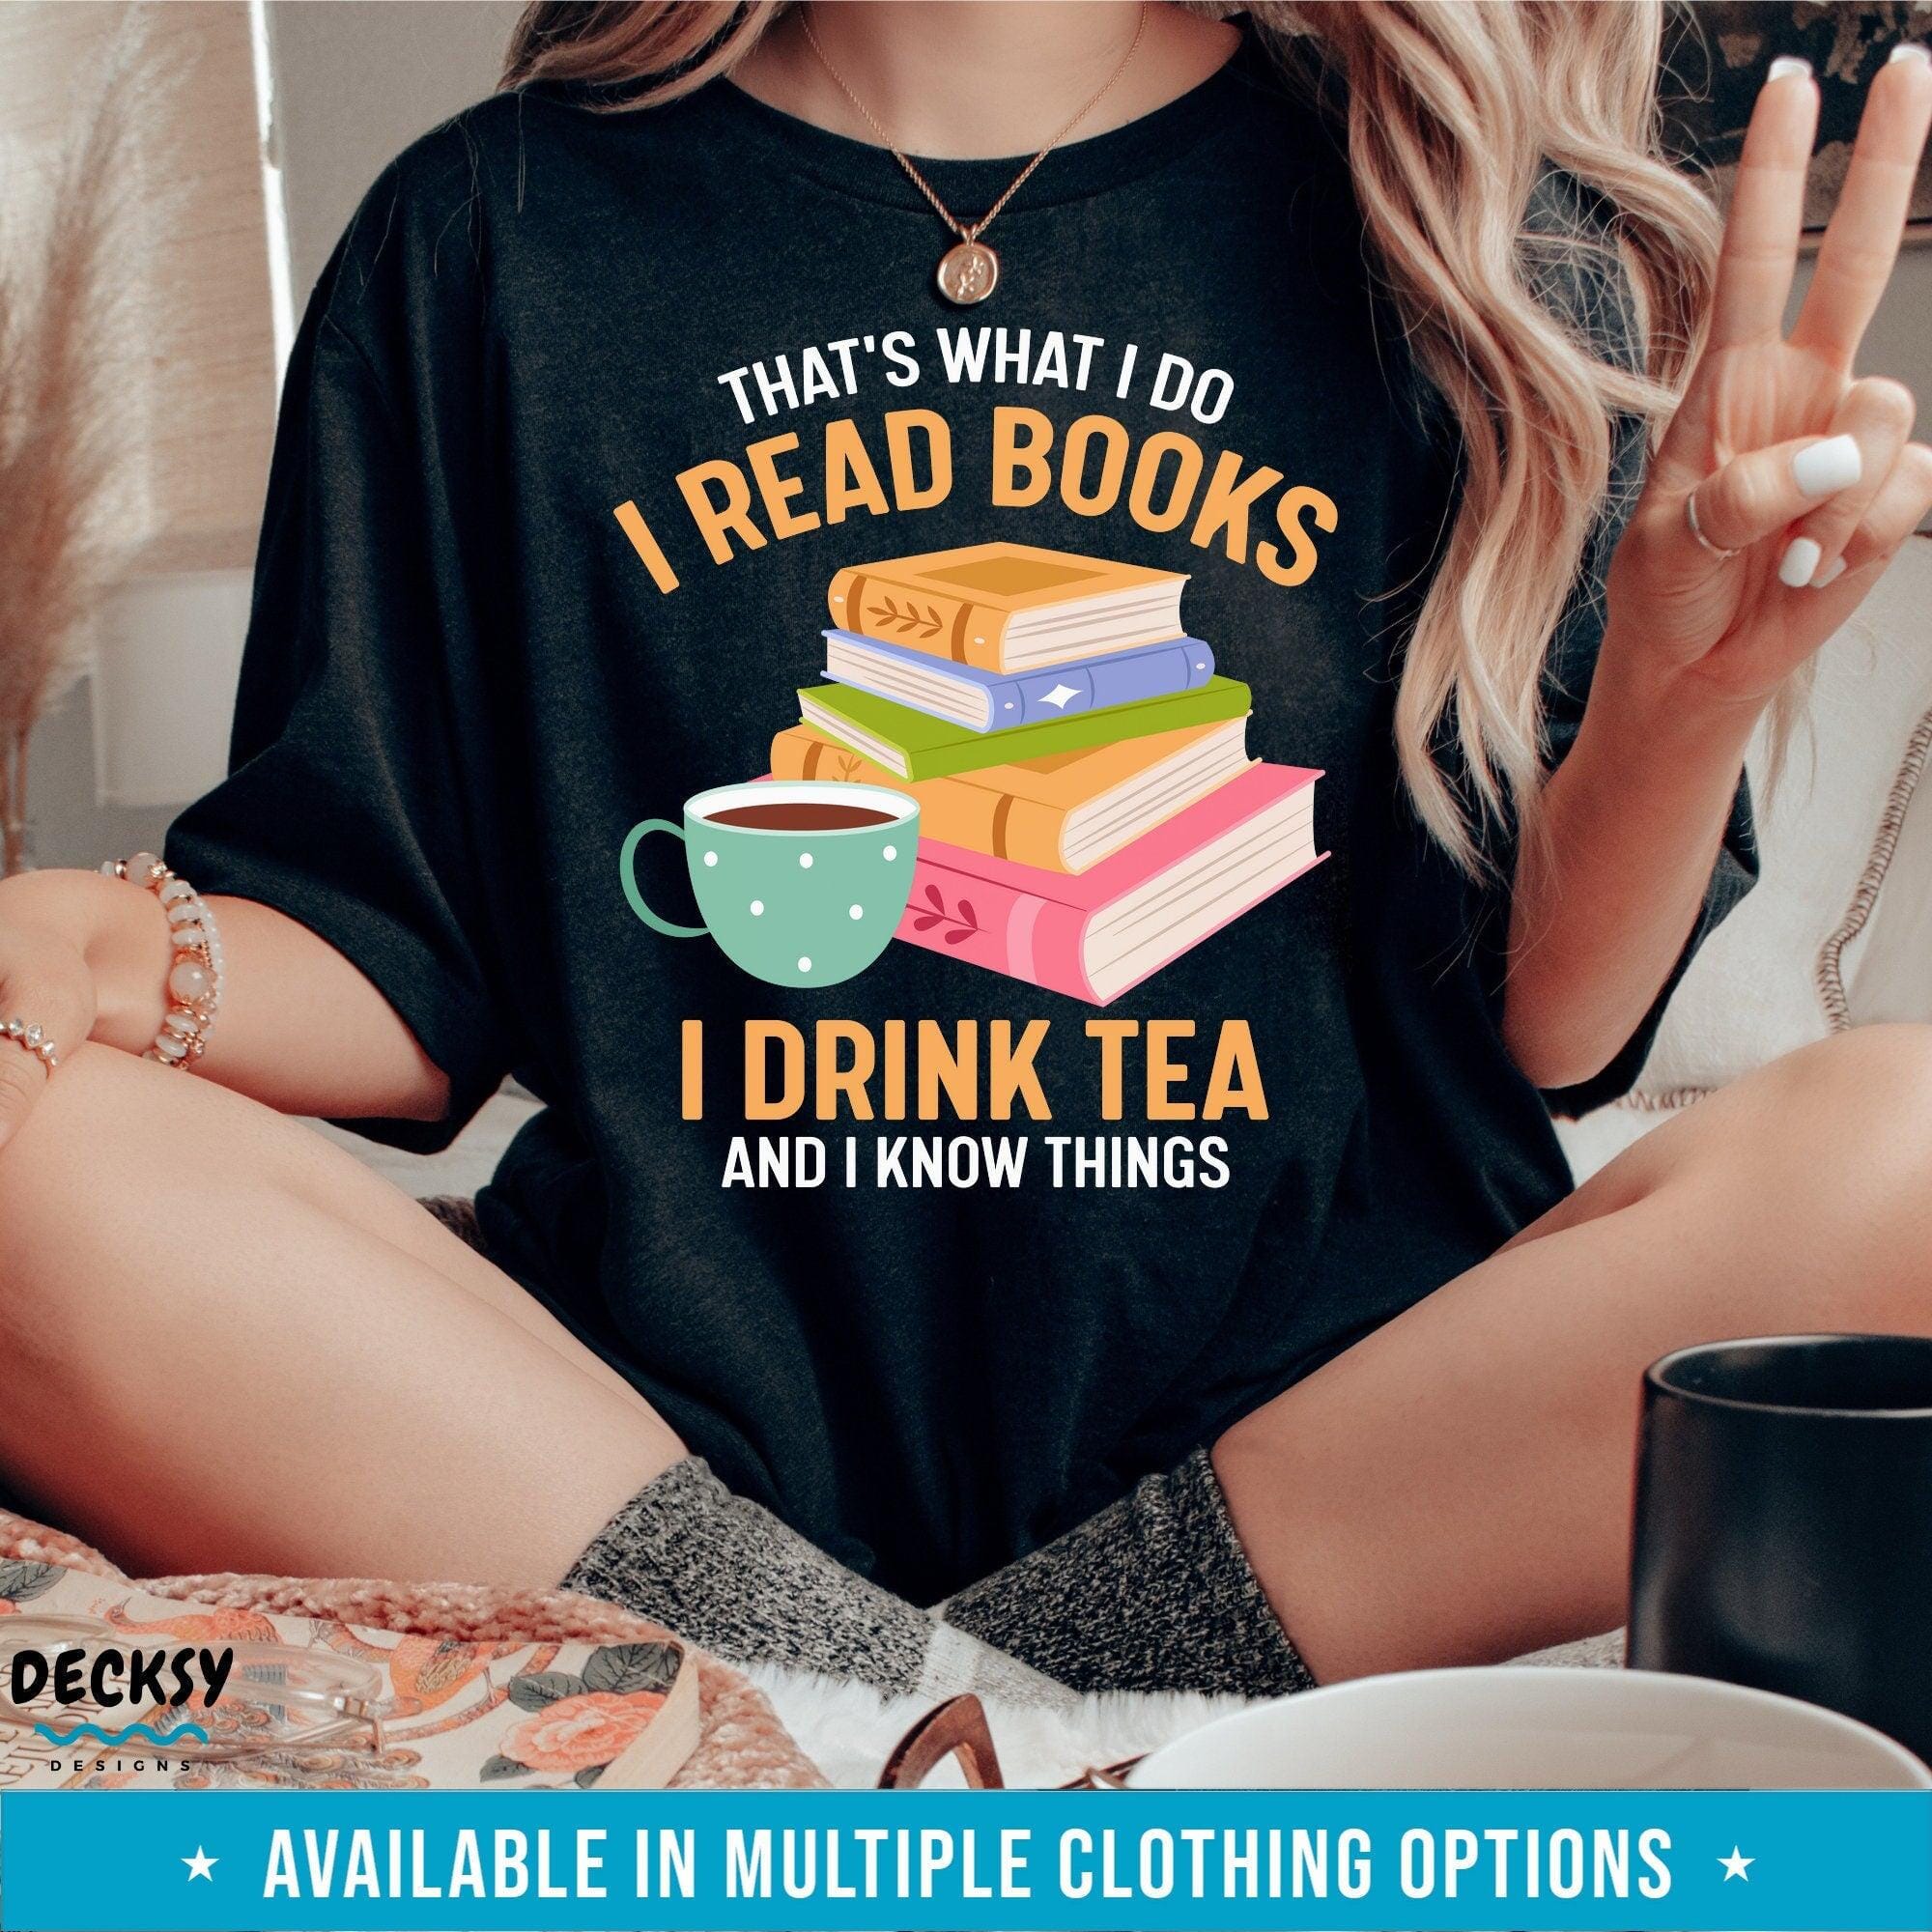 Book Reader Shirt, Gift For Tea Lover-Clothing:Gender-Neutral Adult Clothing:Tops & Tees:T-shirts:Graphic Tees-DecksyDesigns